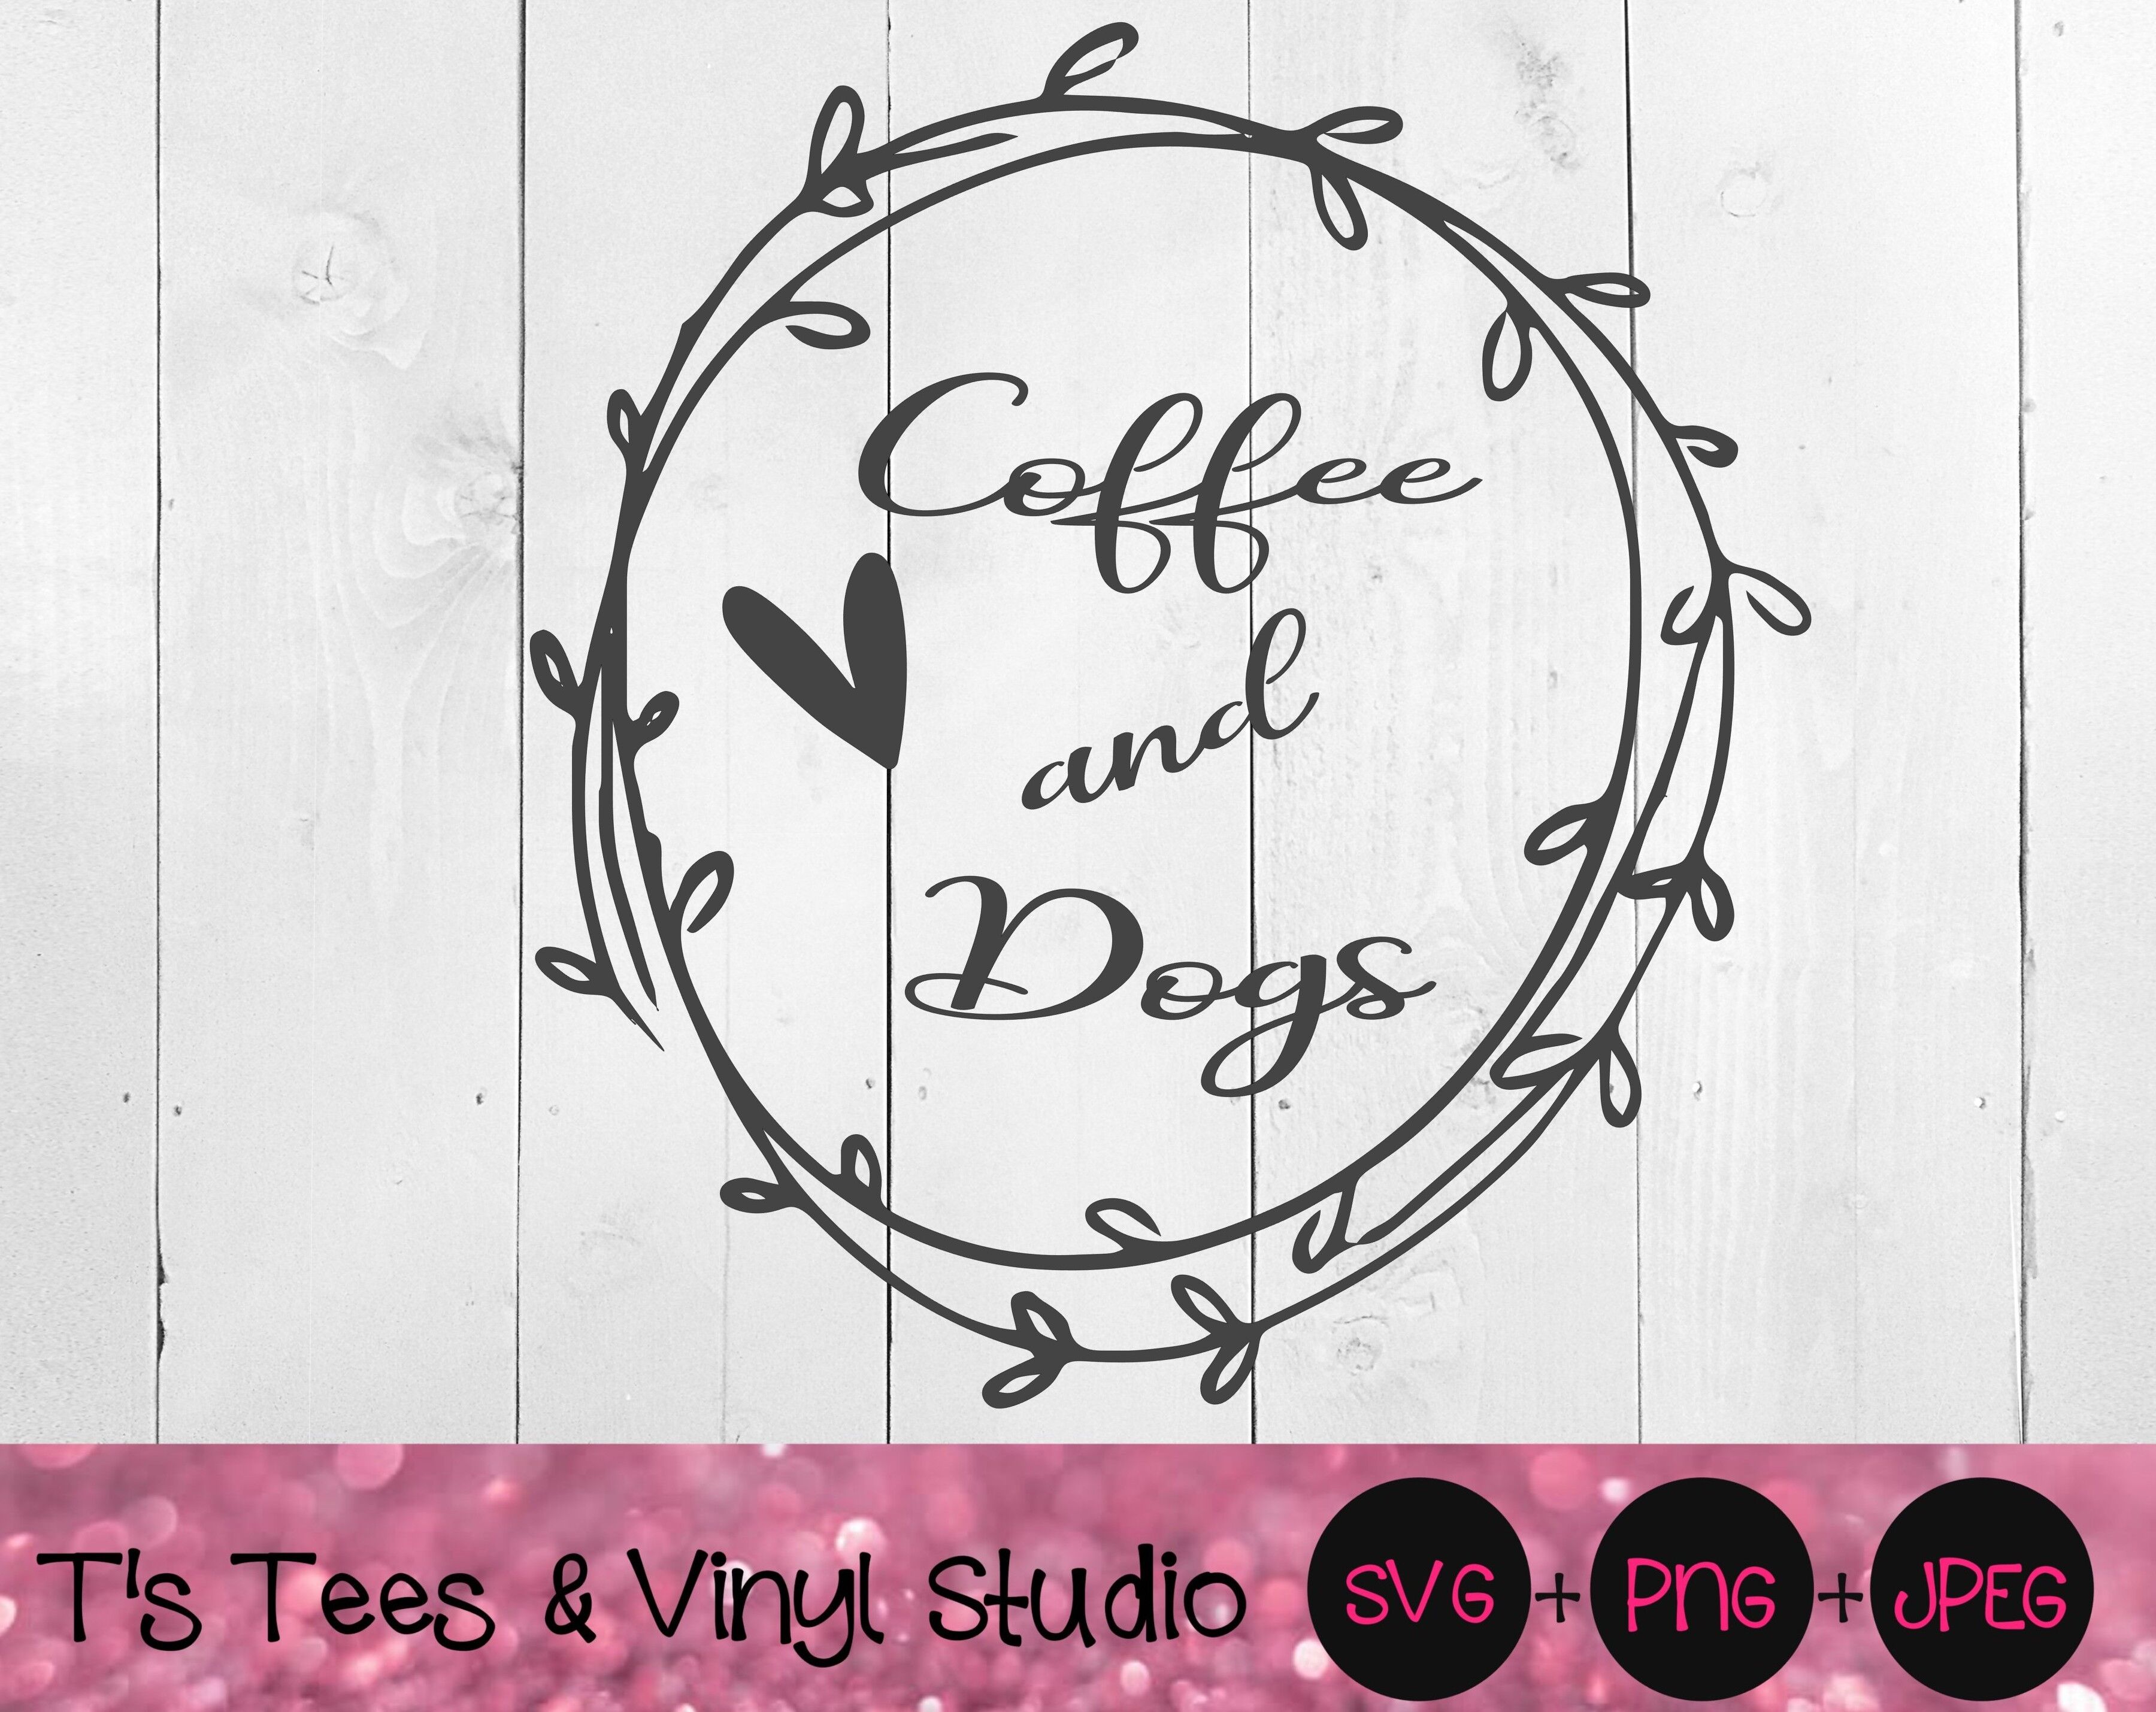 Download Coffee And Dogs Svg Love Coffee And Dogs Svg Coffee Svg Dogs Svg C By T S Tees Vinyl Studio Thehungryjpeg Com